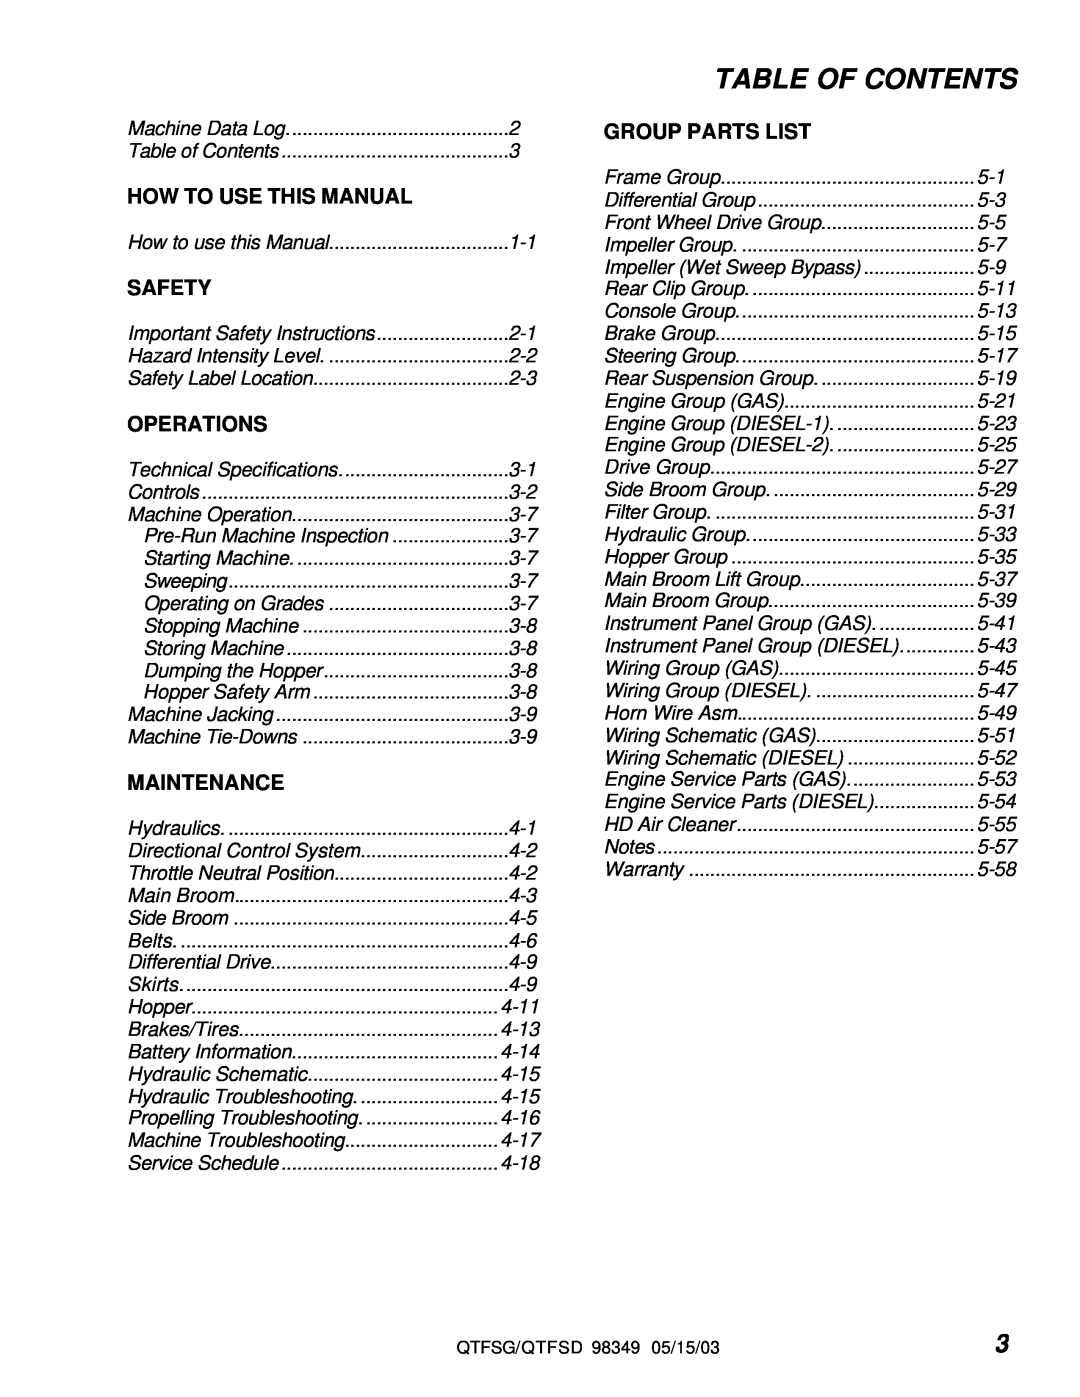 Windsor QTFSD, QTFSG manual Table Of Contents, How To Use This Manual, Safety, Operations, Maintenance, Group Parts List 